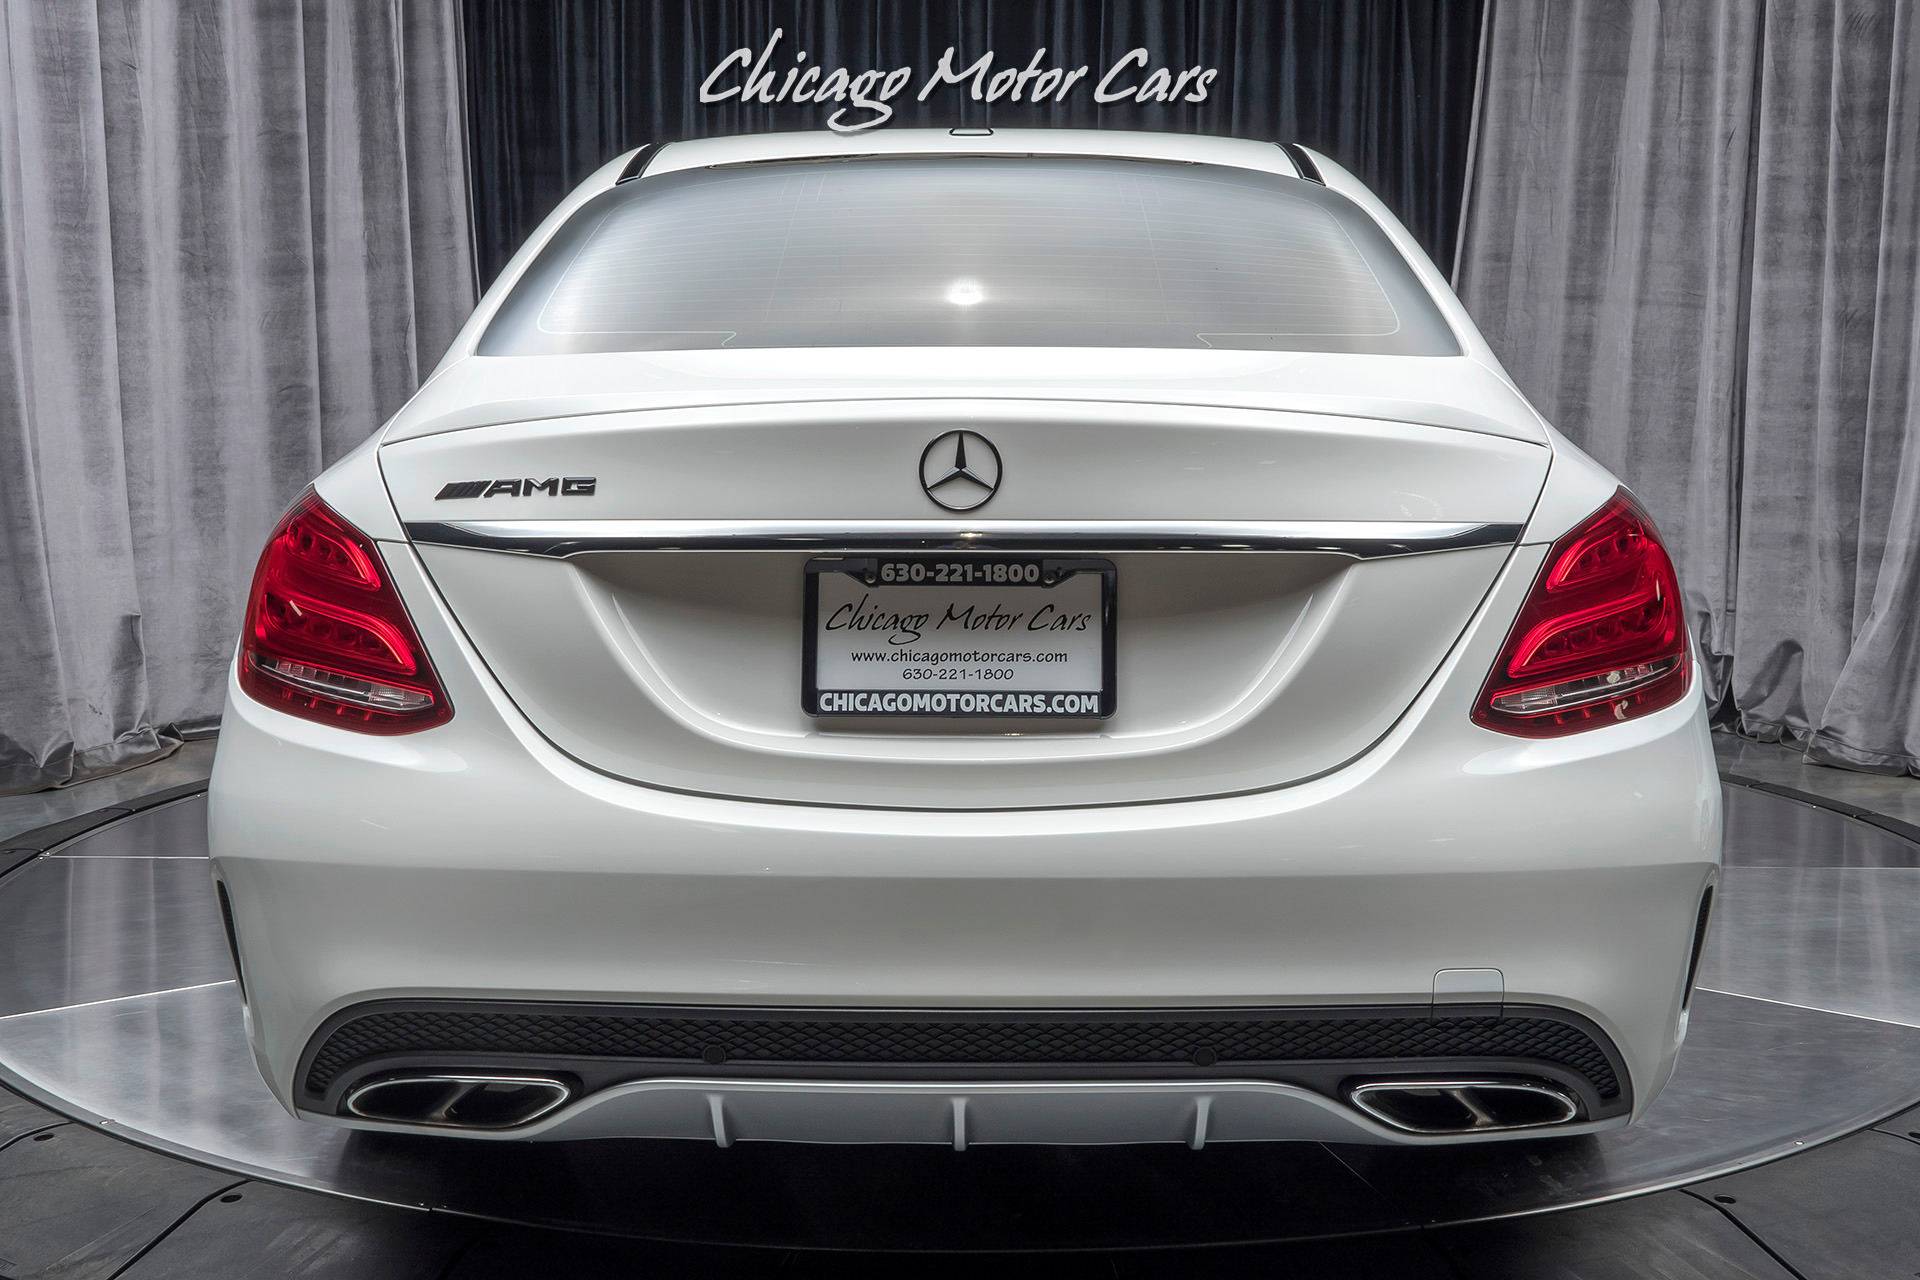 Used-2016-Mercedes-Benz-C450-AMG-C450-AMG-Sedan-MSRP-61k-LOADED-WITH-FACTORY-OPTIONS